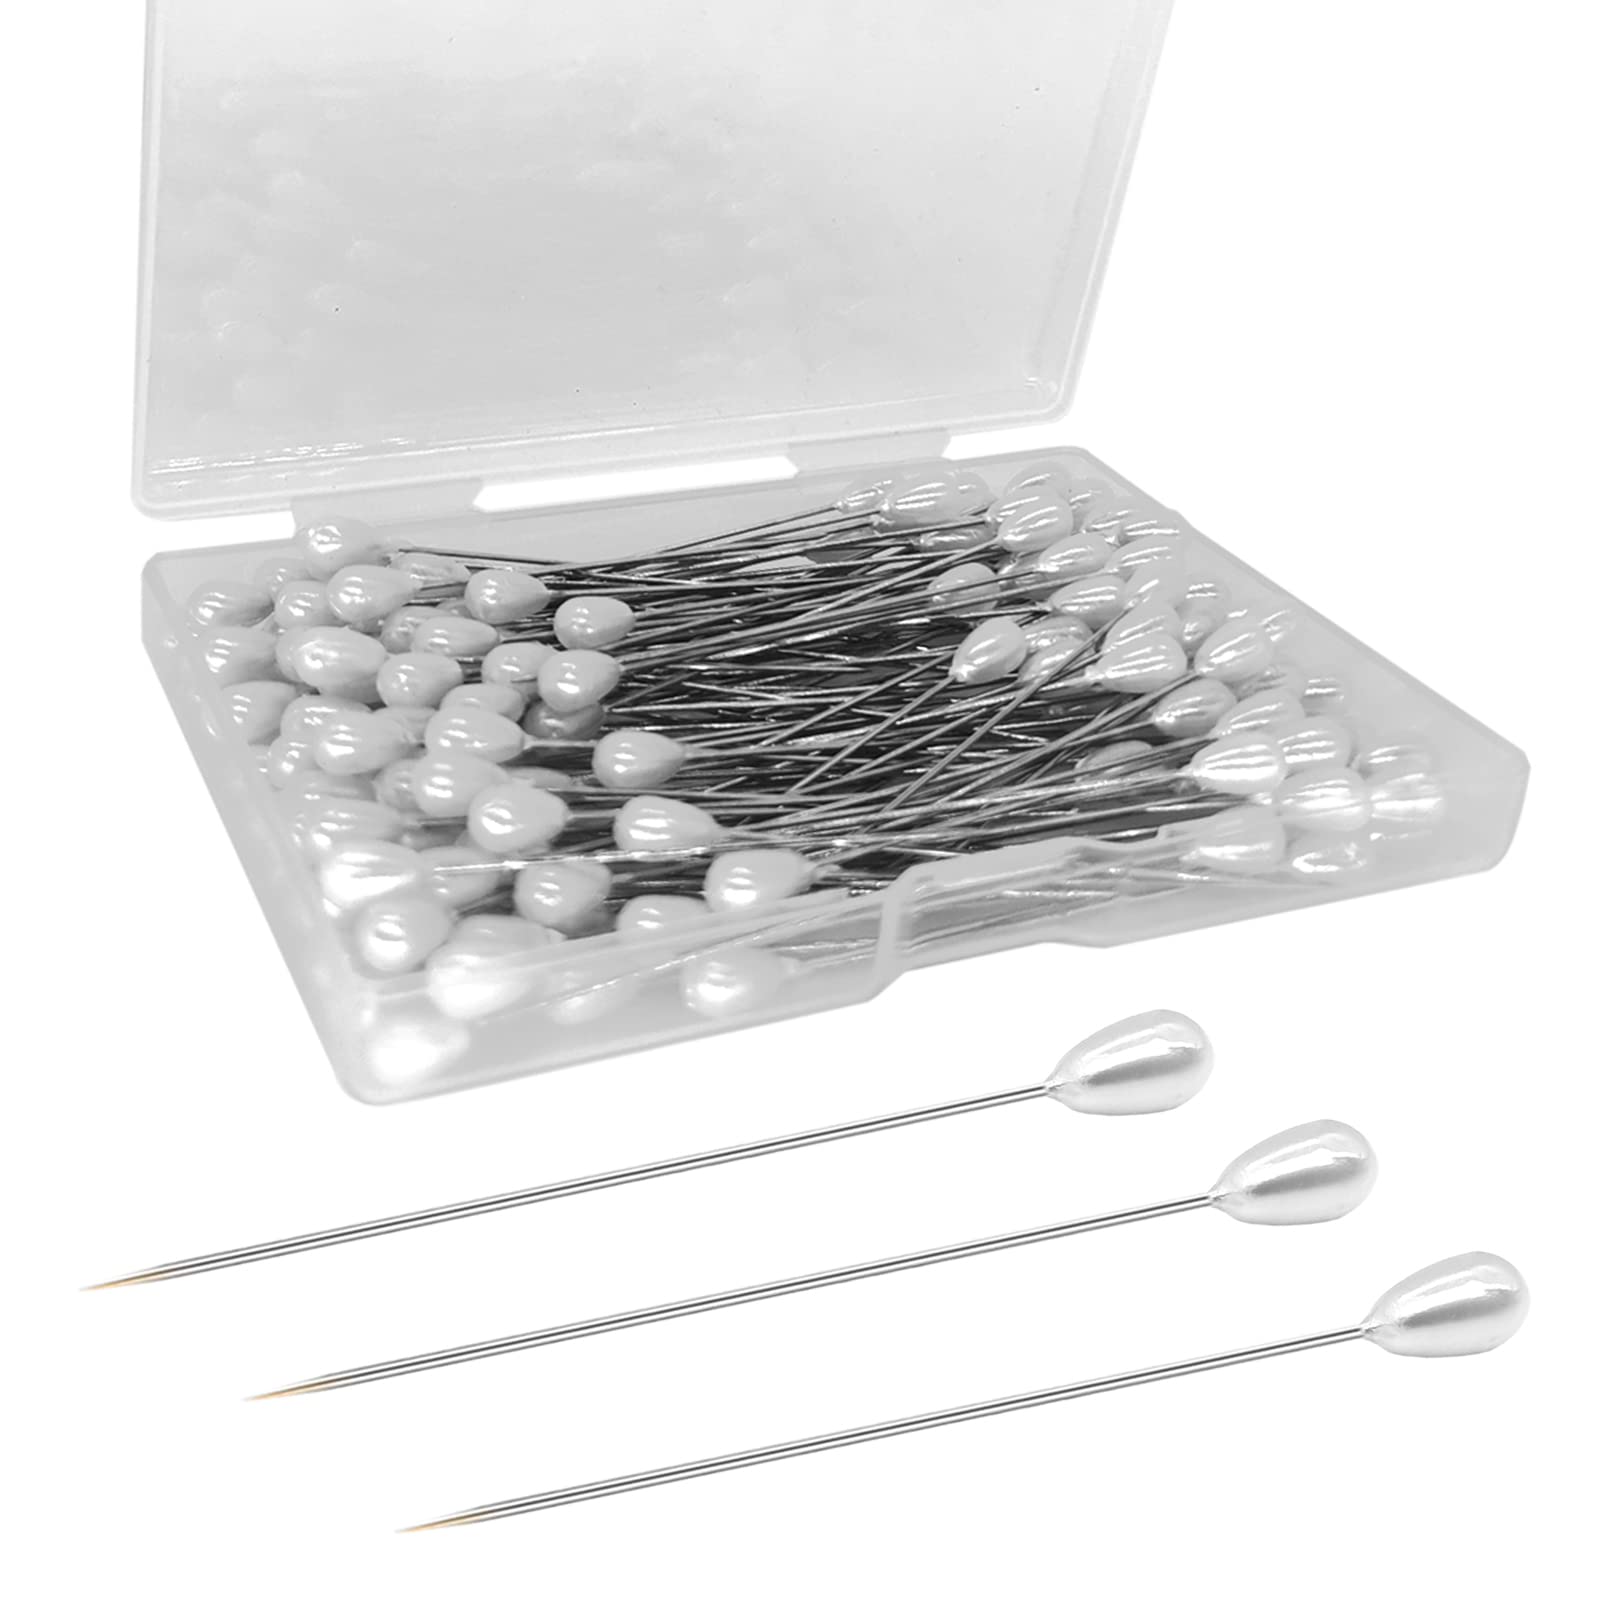 2000PCS Straight Pins for Crafts and Sewing